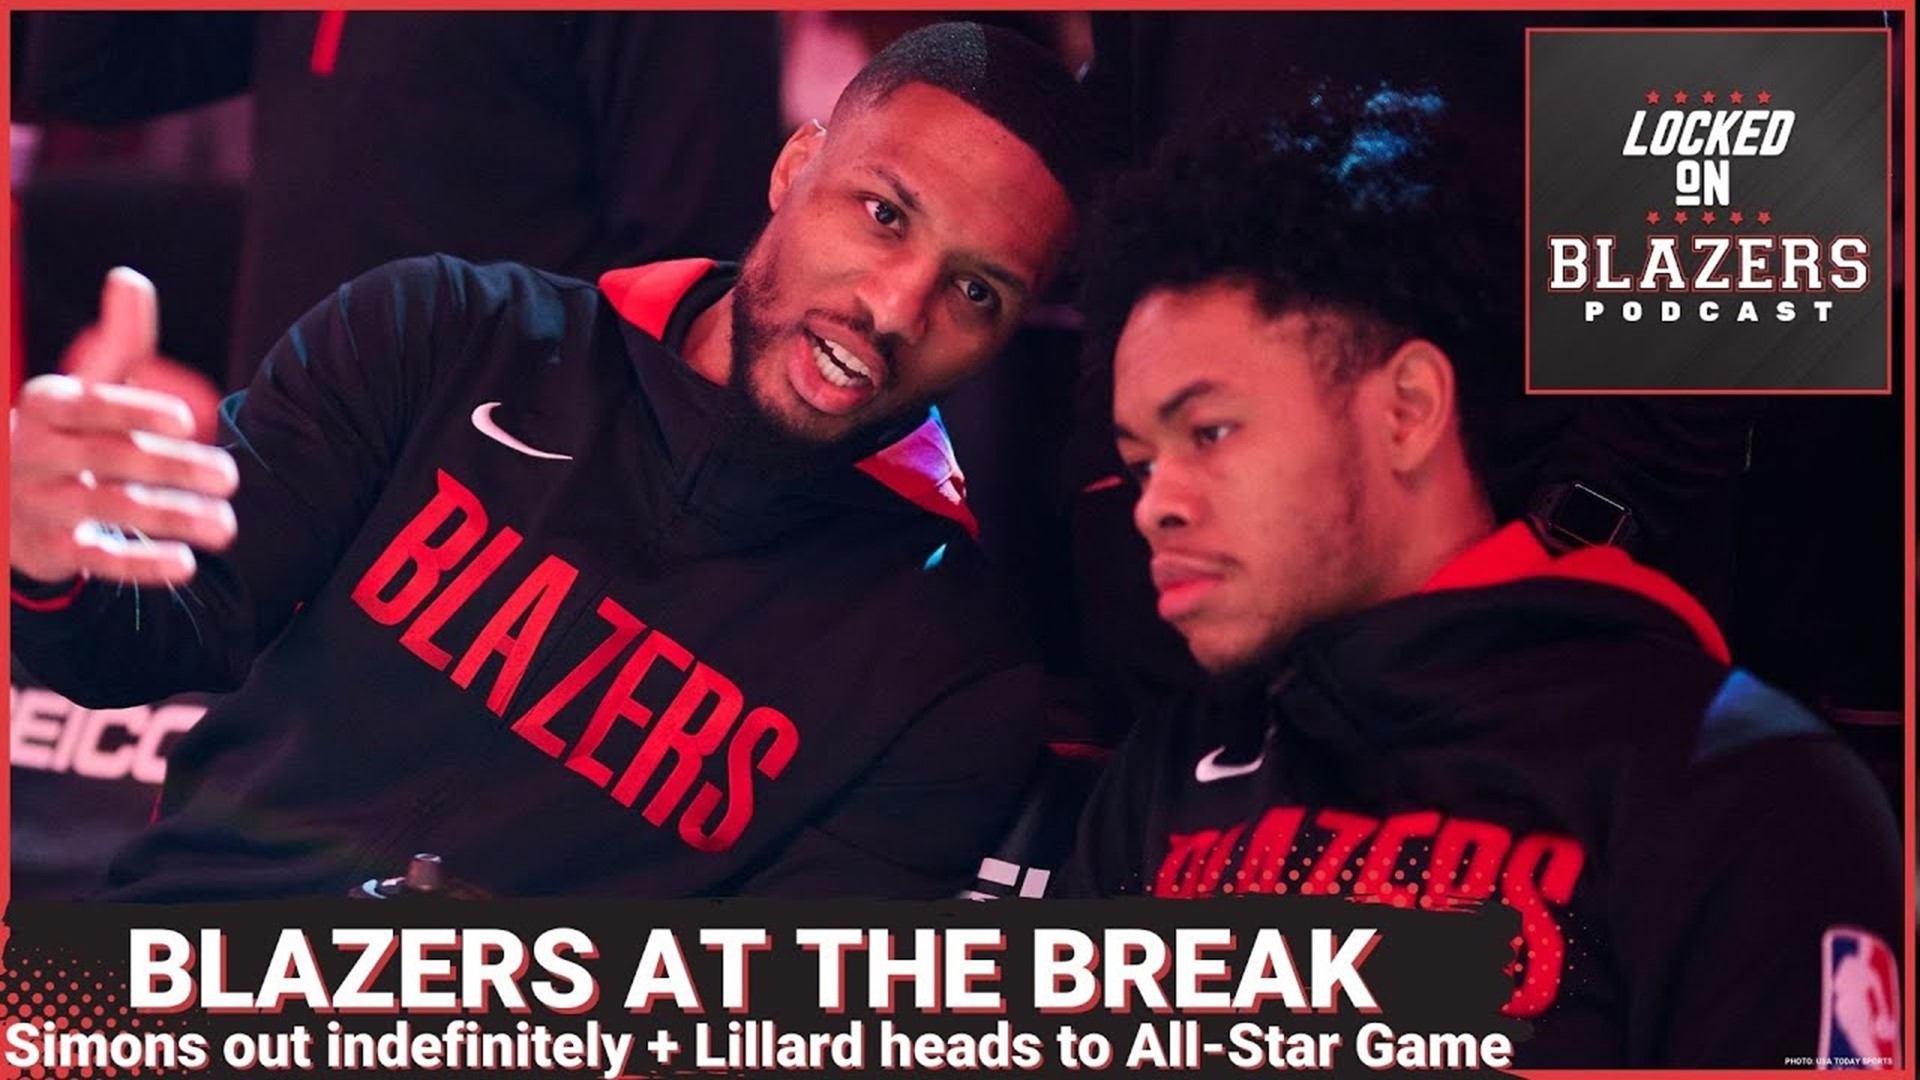 Anfernee Simons is out indefinitely after suffering a Grade 2 ankle sprain. What does this mean for the Blazers? Plus, Damian Lillard is headed to All-Star weekend!